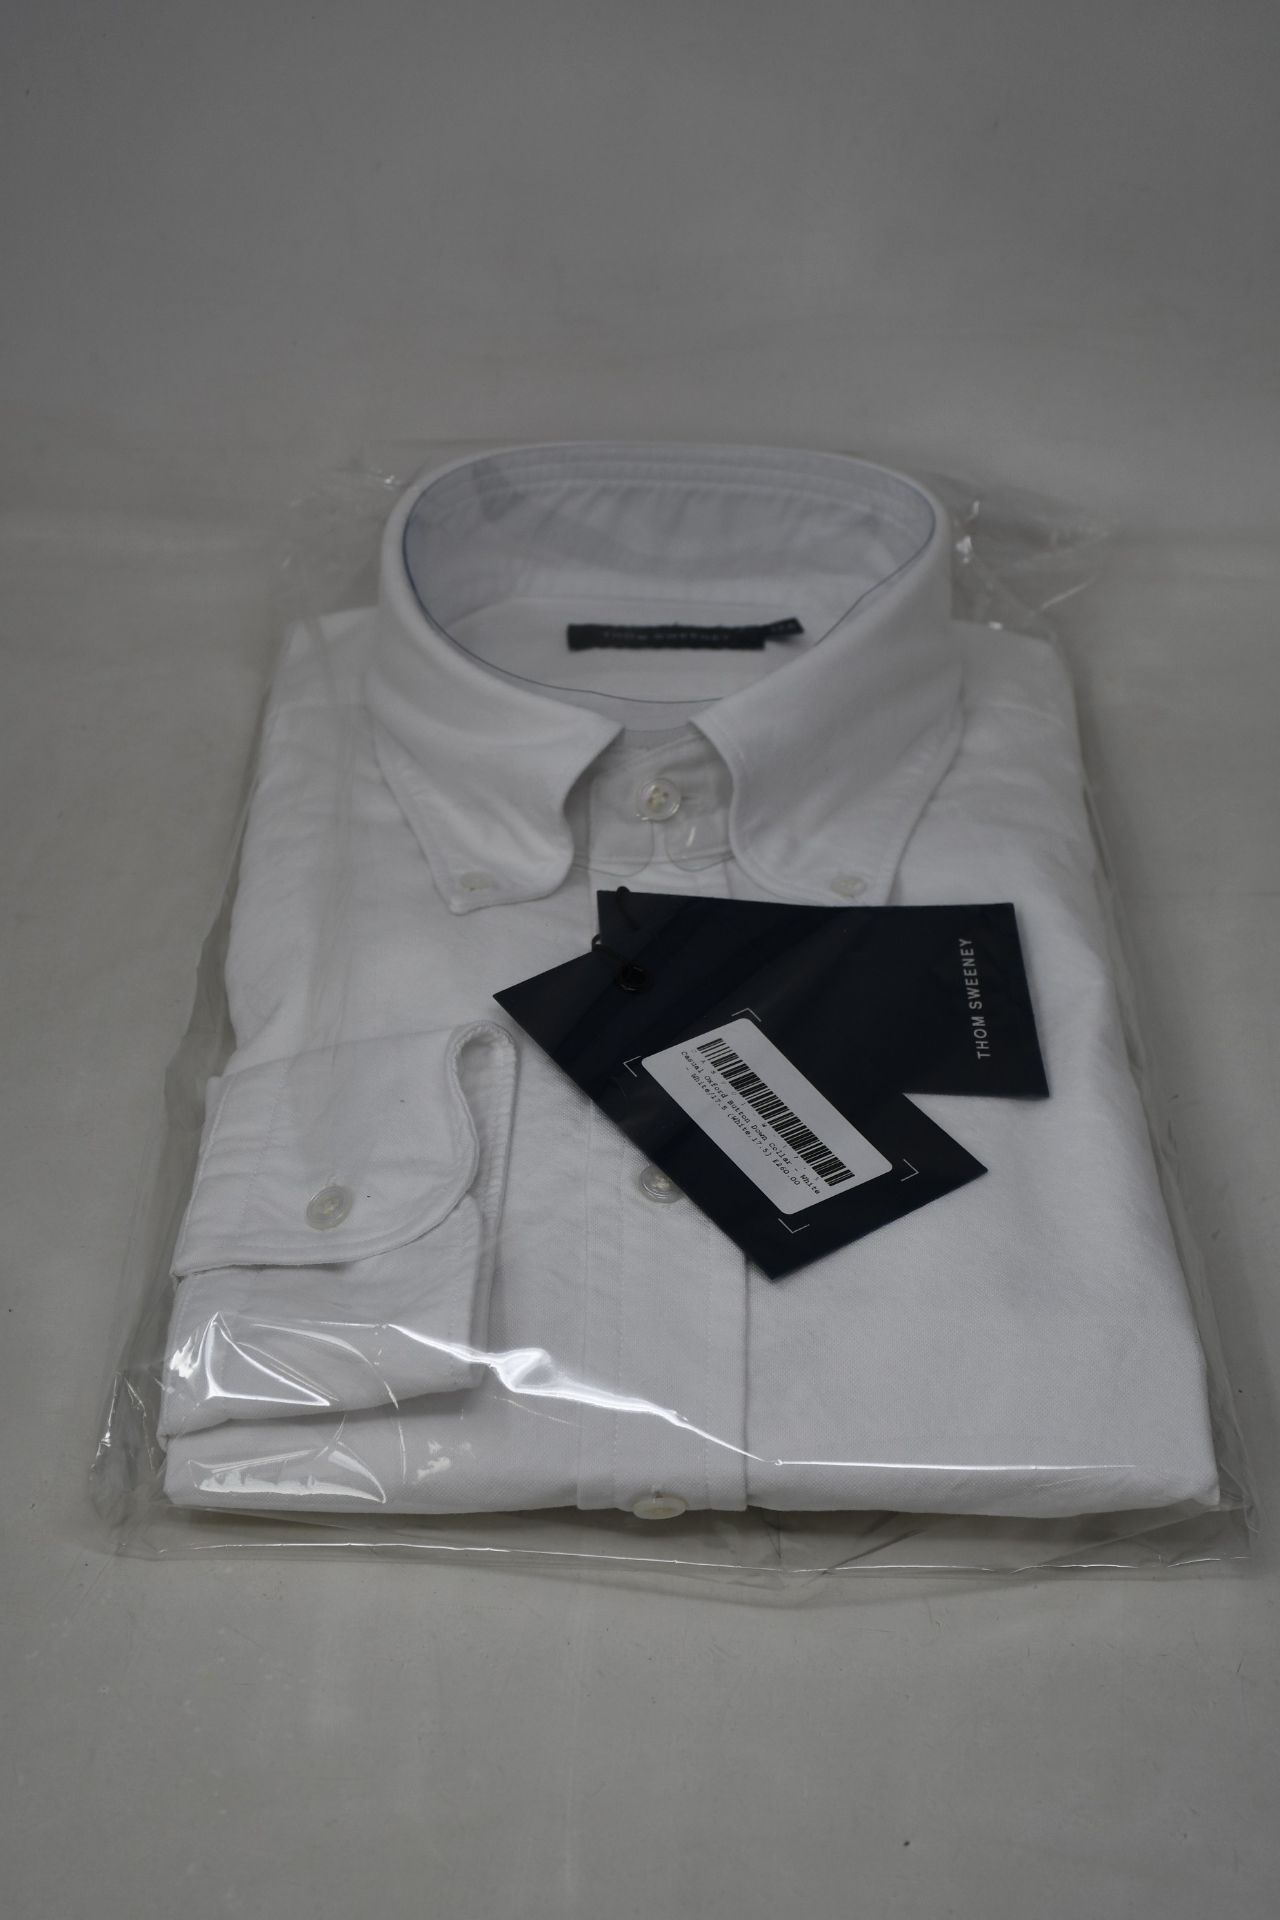 An as new Thom Sweeney casual Oxford button down collar white shirt (16.5” - RRP £260).